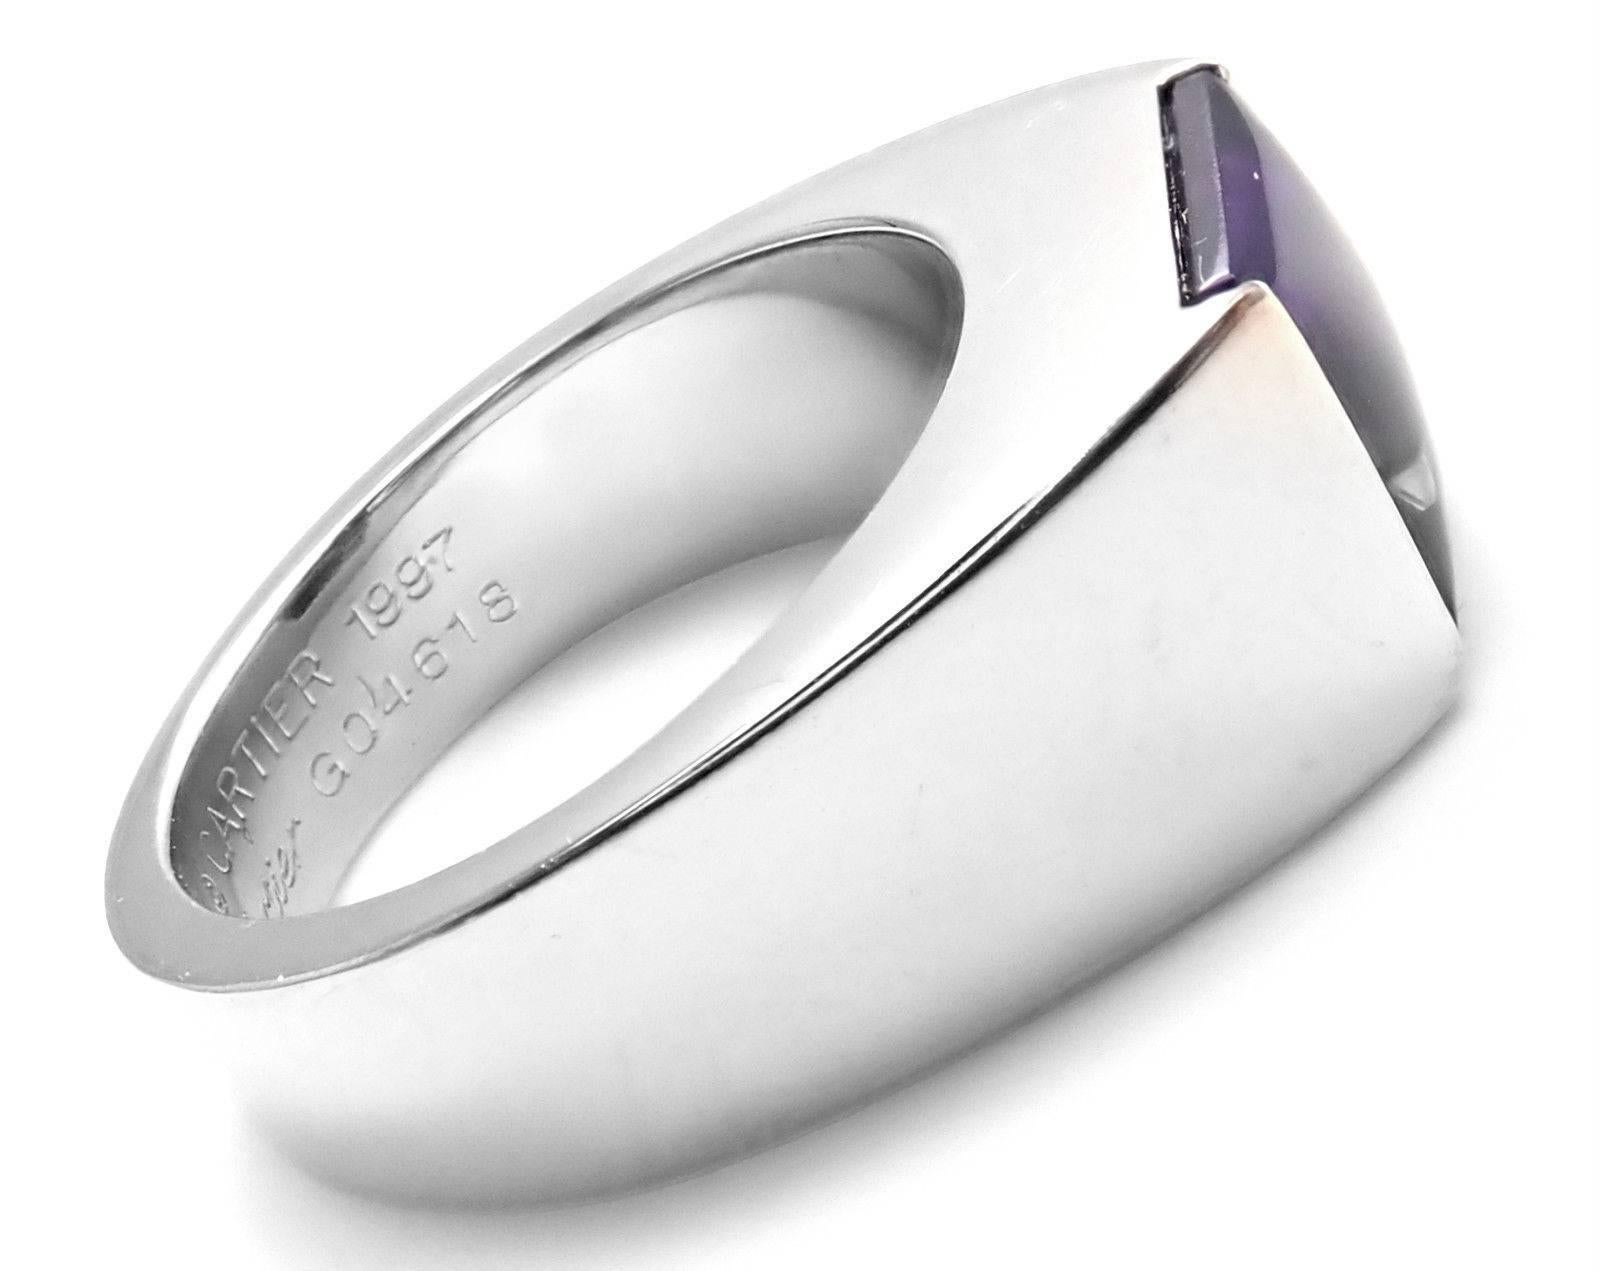 18k White Gold Amethyst Tank Band Ring by Cartier.  
With 1 x Amethyst, princess cut, approximately 1ct
Retail Price: $3,425 plus tax.
Details: 
Weight: 11.8 grams
Size - 4 3/4 US, Europe 49
Width  - 7mm 
Stamped Hallmarks: Cartier 750 49,1997